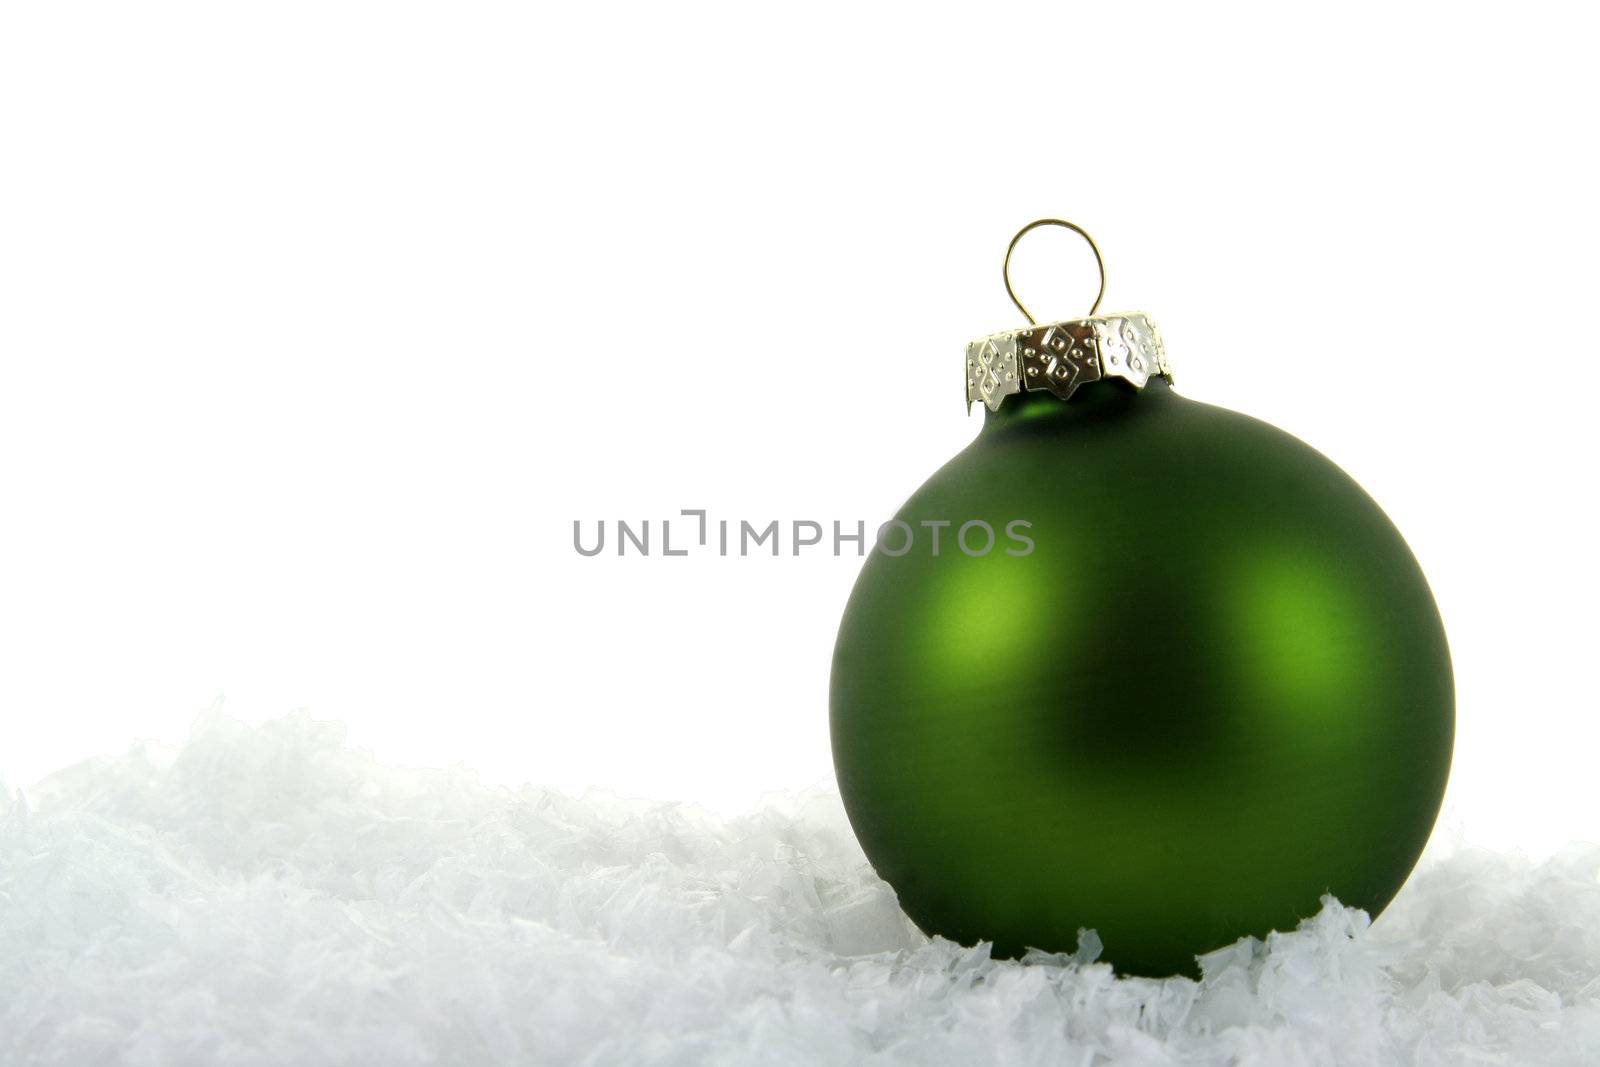 A green Christmas bauble sitting in a bed of snow.
